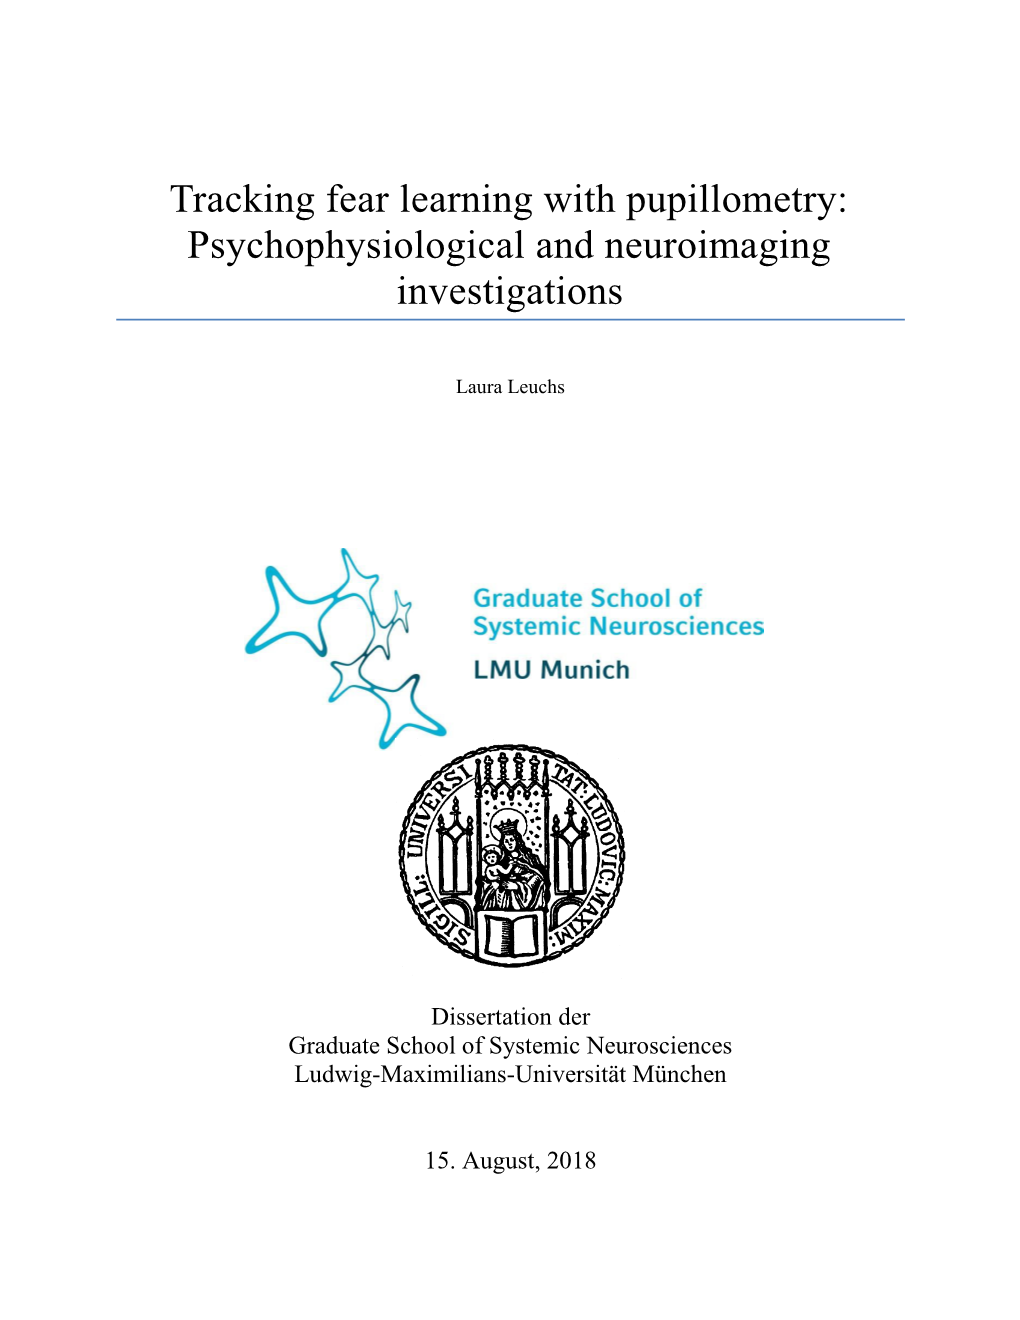 Tracking Fear Learning with Pupillometry: Psychophysiological and Neuroimaging Investigations